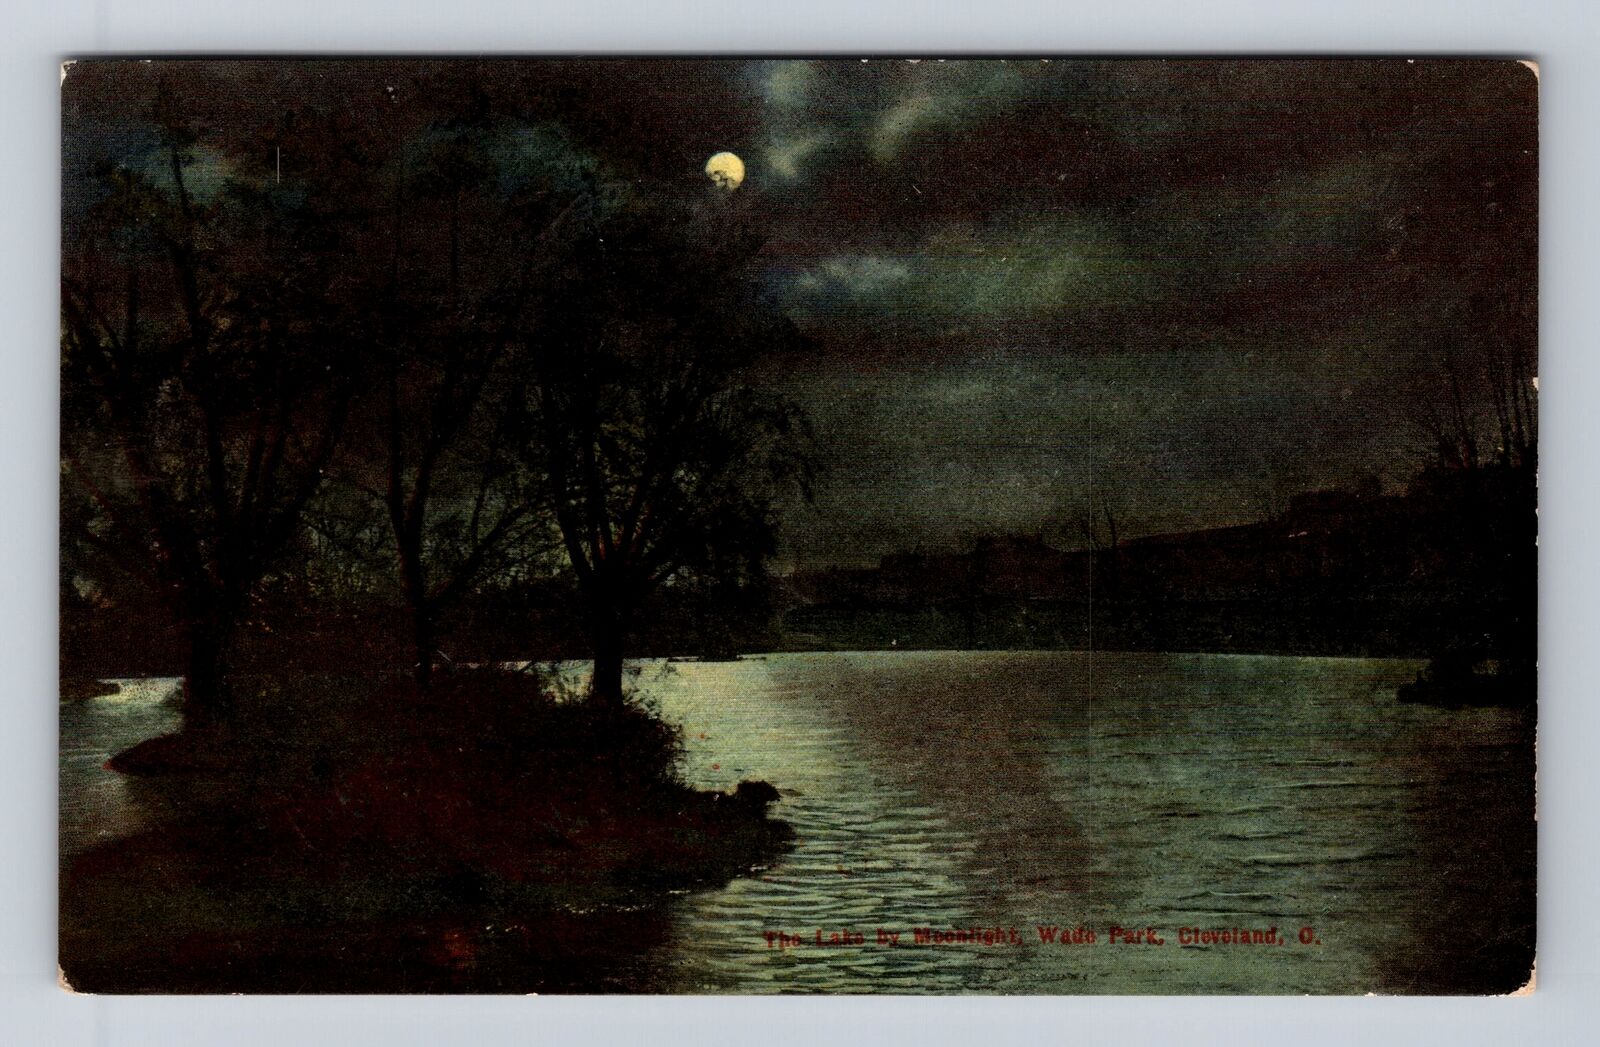 Cleveland OH-Ohio, Lake By Moonlight, Wade Park, Antique Vintage c1913 Postcard